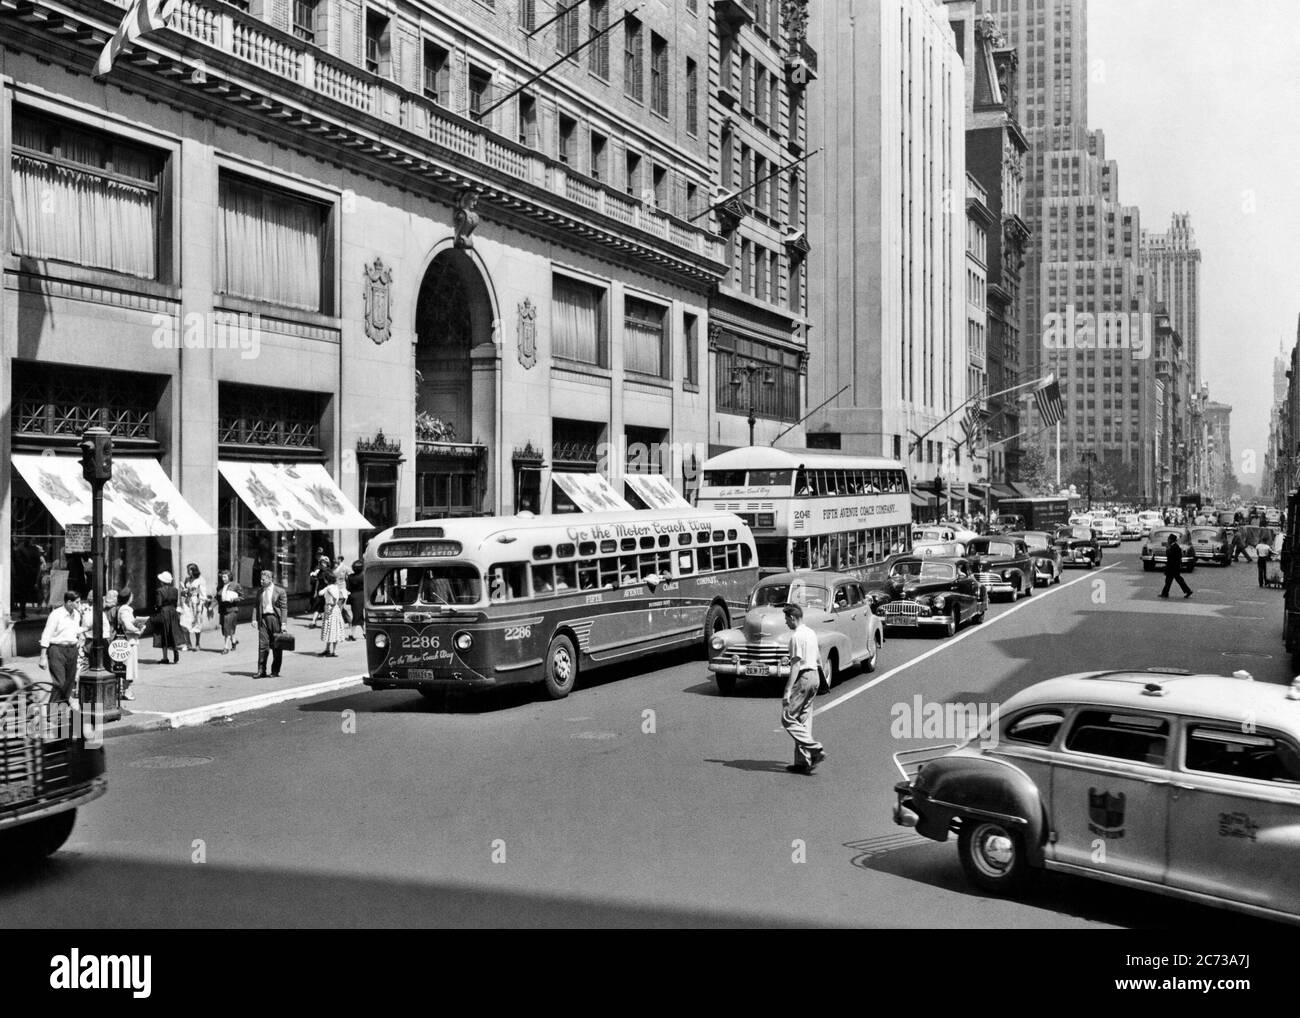 1940s PEDESTRIANS BUSES CARS CABS 5TH AVENUE TRAFFIC LOOKING NORTH LORD & TAYLOR DEPARTMENT STORE MANHATTAN NEW YORK CITY NY USA - r4470 PRC001 HARS CAB UNITED STATES COPY SPACE LADIES PERSONS SHOPS UNITED STATES OF AMERICA AUTOMOBILE MALES PEDESTRIANS NY TRANSPORTATION B&W NORTH AMERICA SHOPPER NORTH AMERICAN SHOPPERS MIDTOWN HIGH ANGLE TAYLOR MOTOR VEHICLE AUTOS EXTERIOR NYC STORES NEW YORK AUTOMOBILES CITIES VEHICLES NEW YORK CITY TAXICAB BUSES COMMERCE TAXIS TRANSIT 5TH AVENUE BLACK AND WHITE BUSINESSES CABS DOUBLE DECKER LORD MOTOR VEHICLES OLD FASHIONED Stock Photo